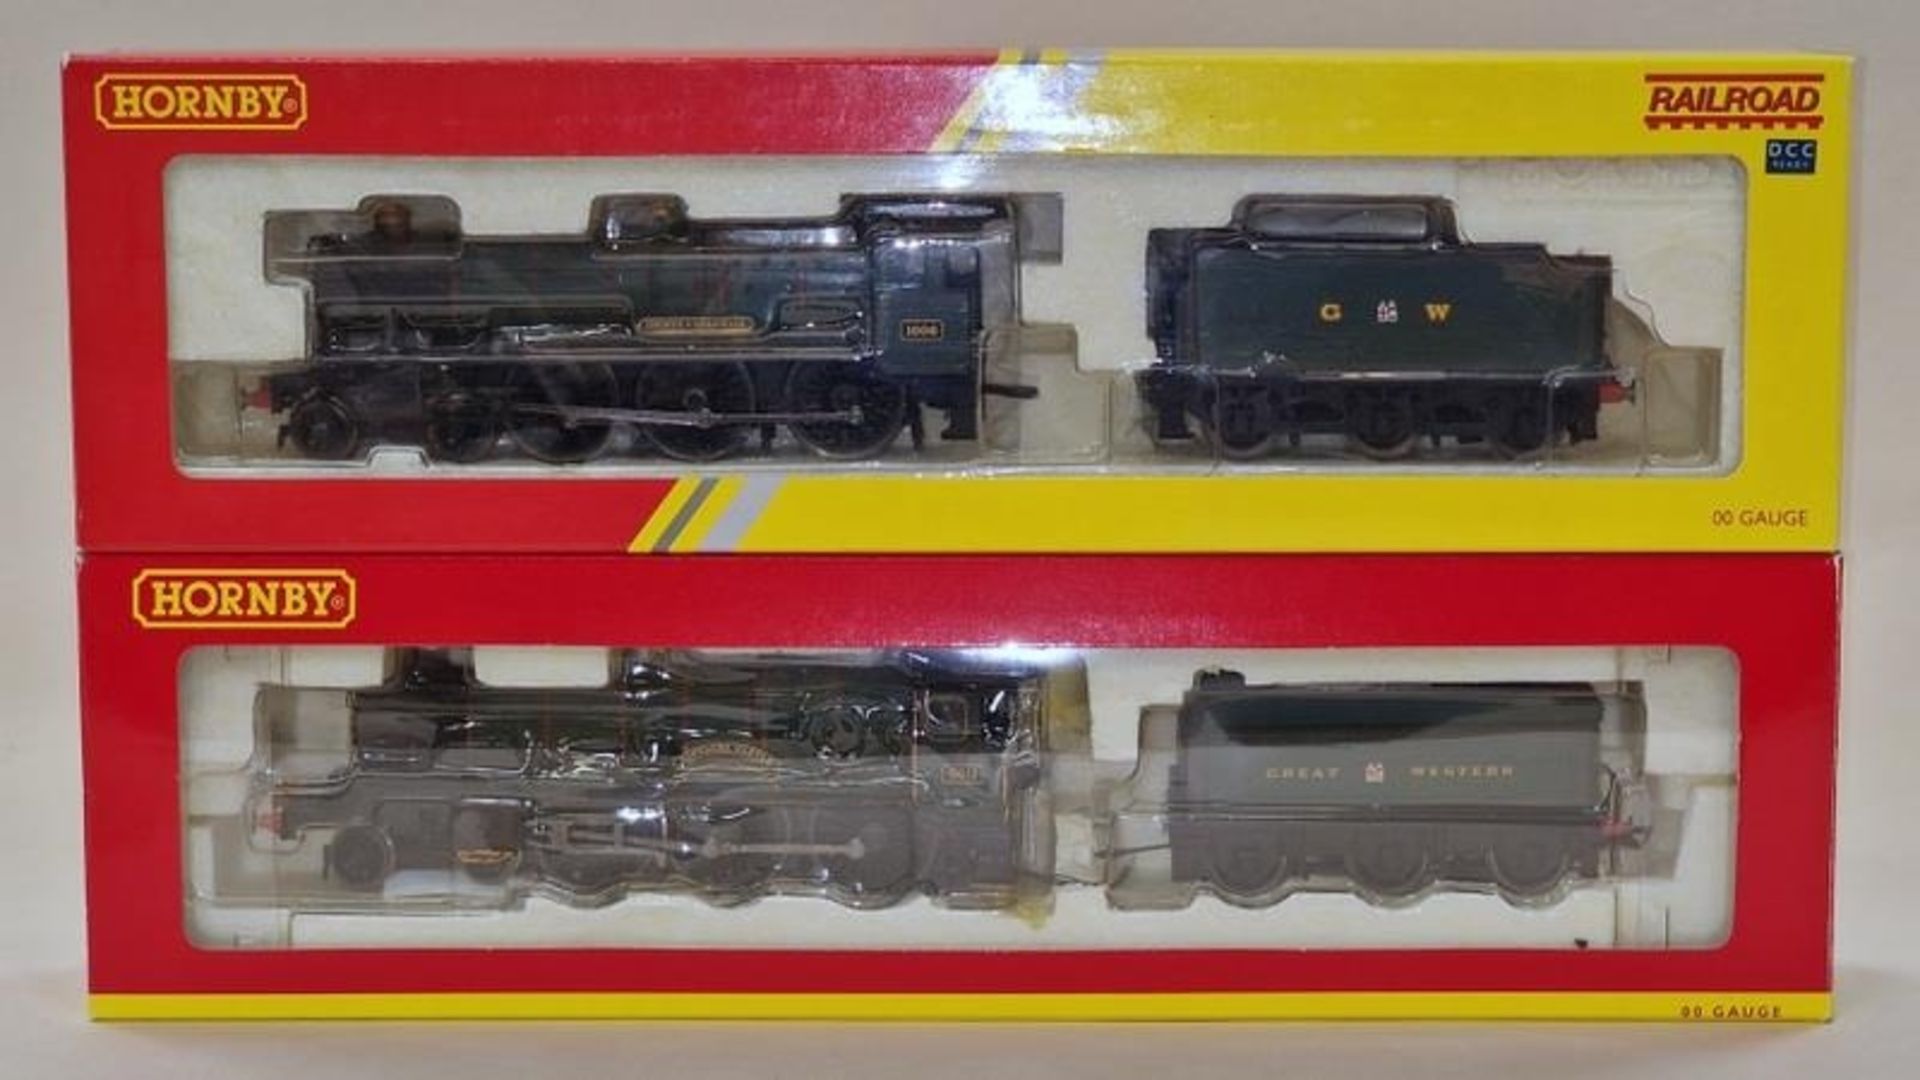 Hornby OO Gauge R2937 GWR County of Cornwall locomotive and tender together with R2848X GWR Castle